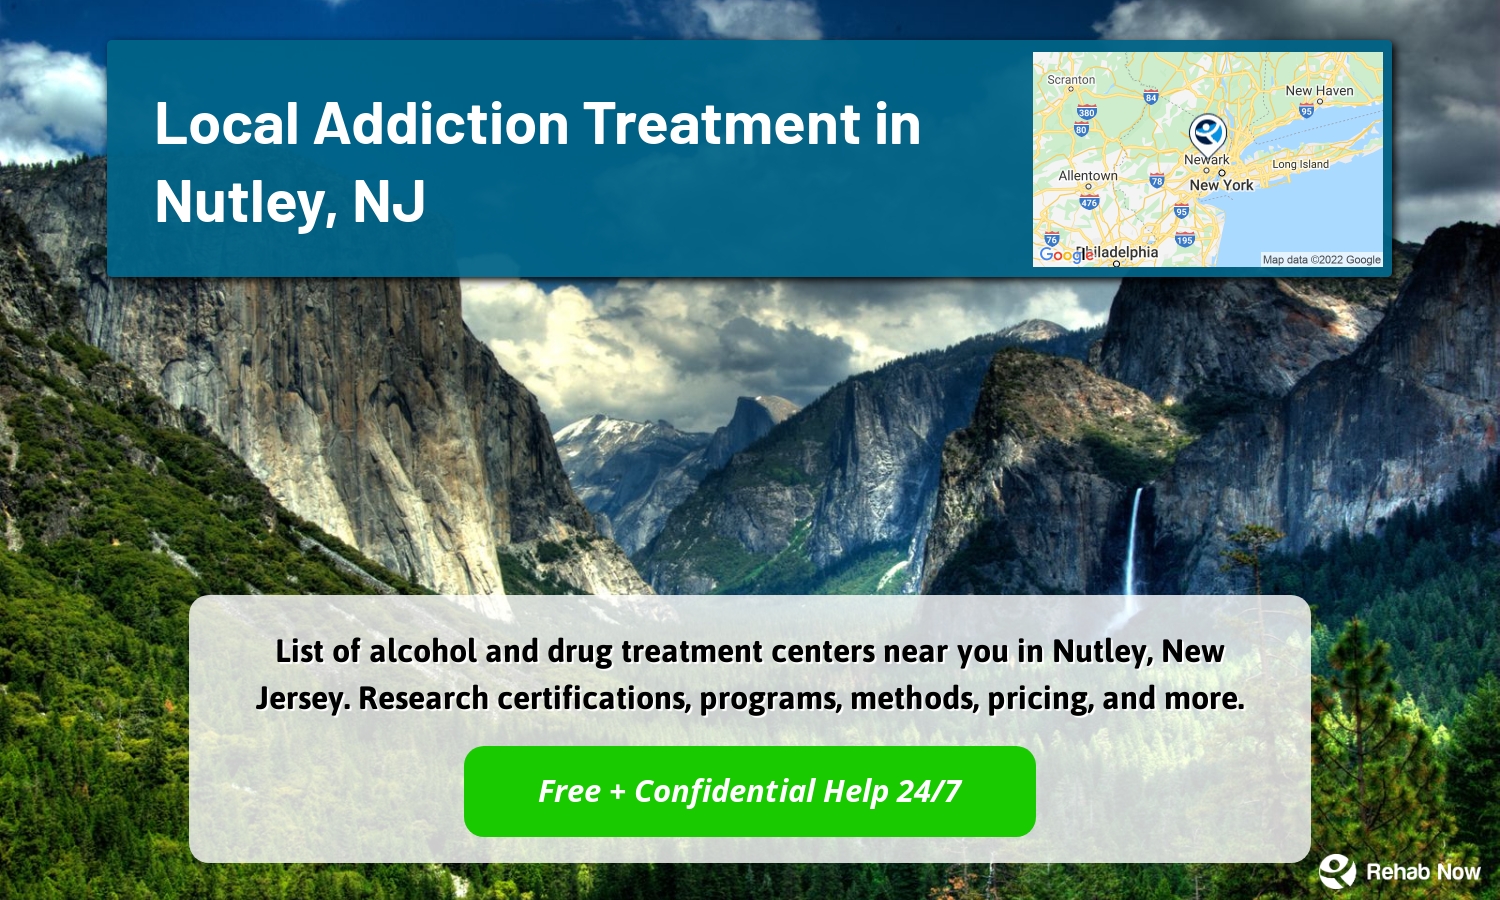 List of alcohol and drug treatment centers near you in Nutley, New Jersey. Research certifications, programs, methods, pricing, and more.